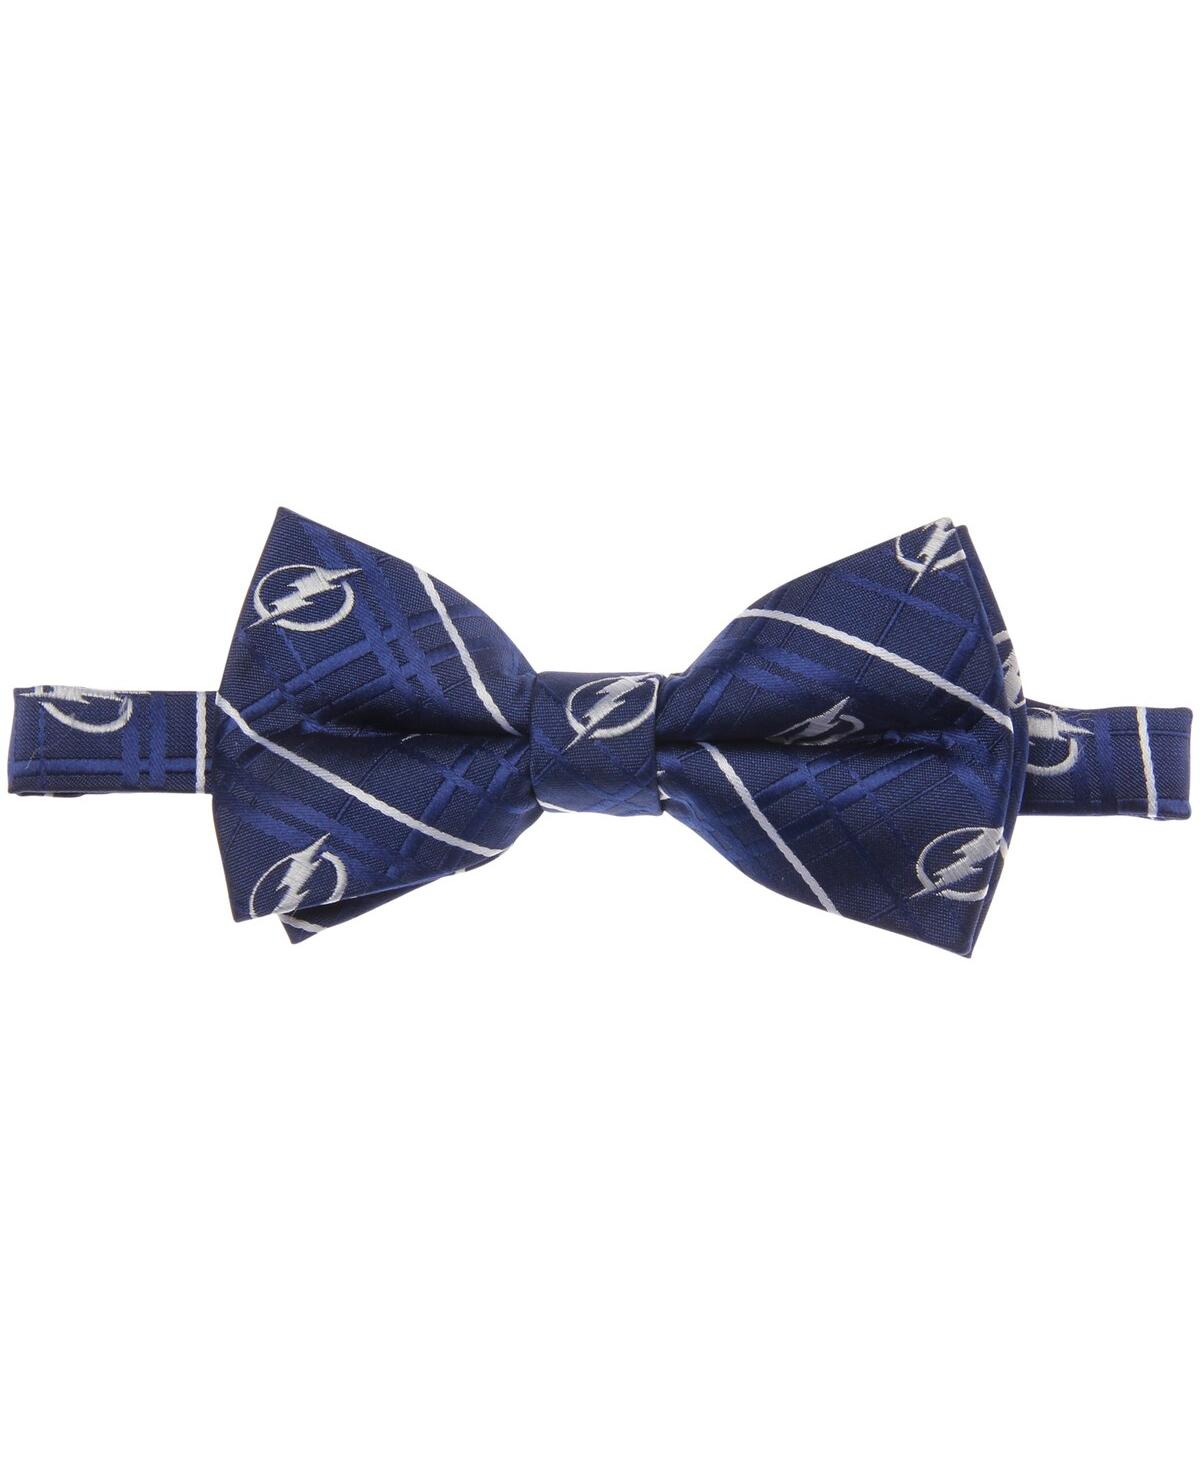 Eagles Wings Men's Tampa Bay Lightning Oxford Bow Tie In Navy